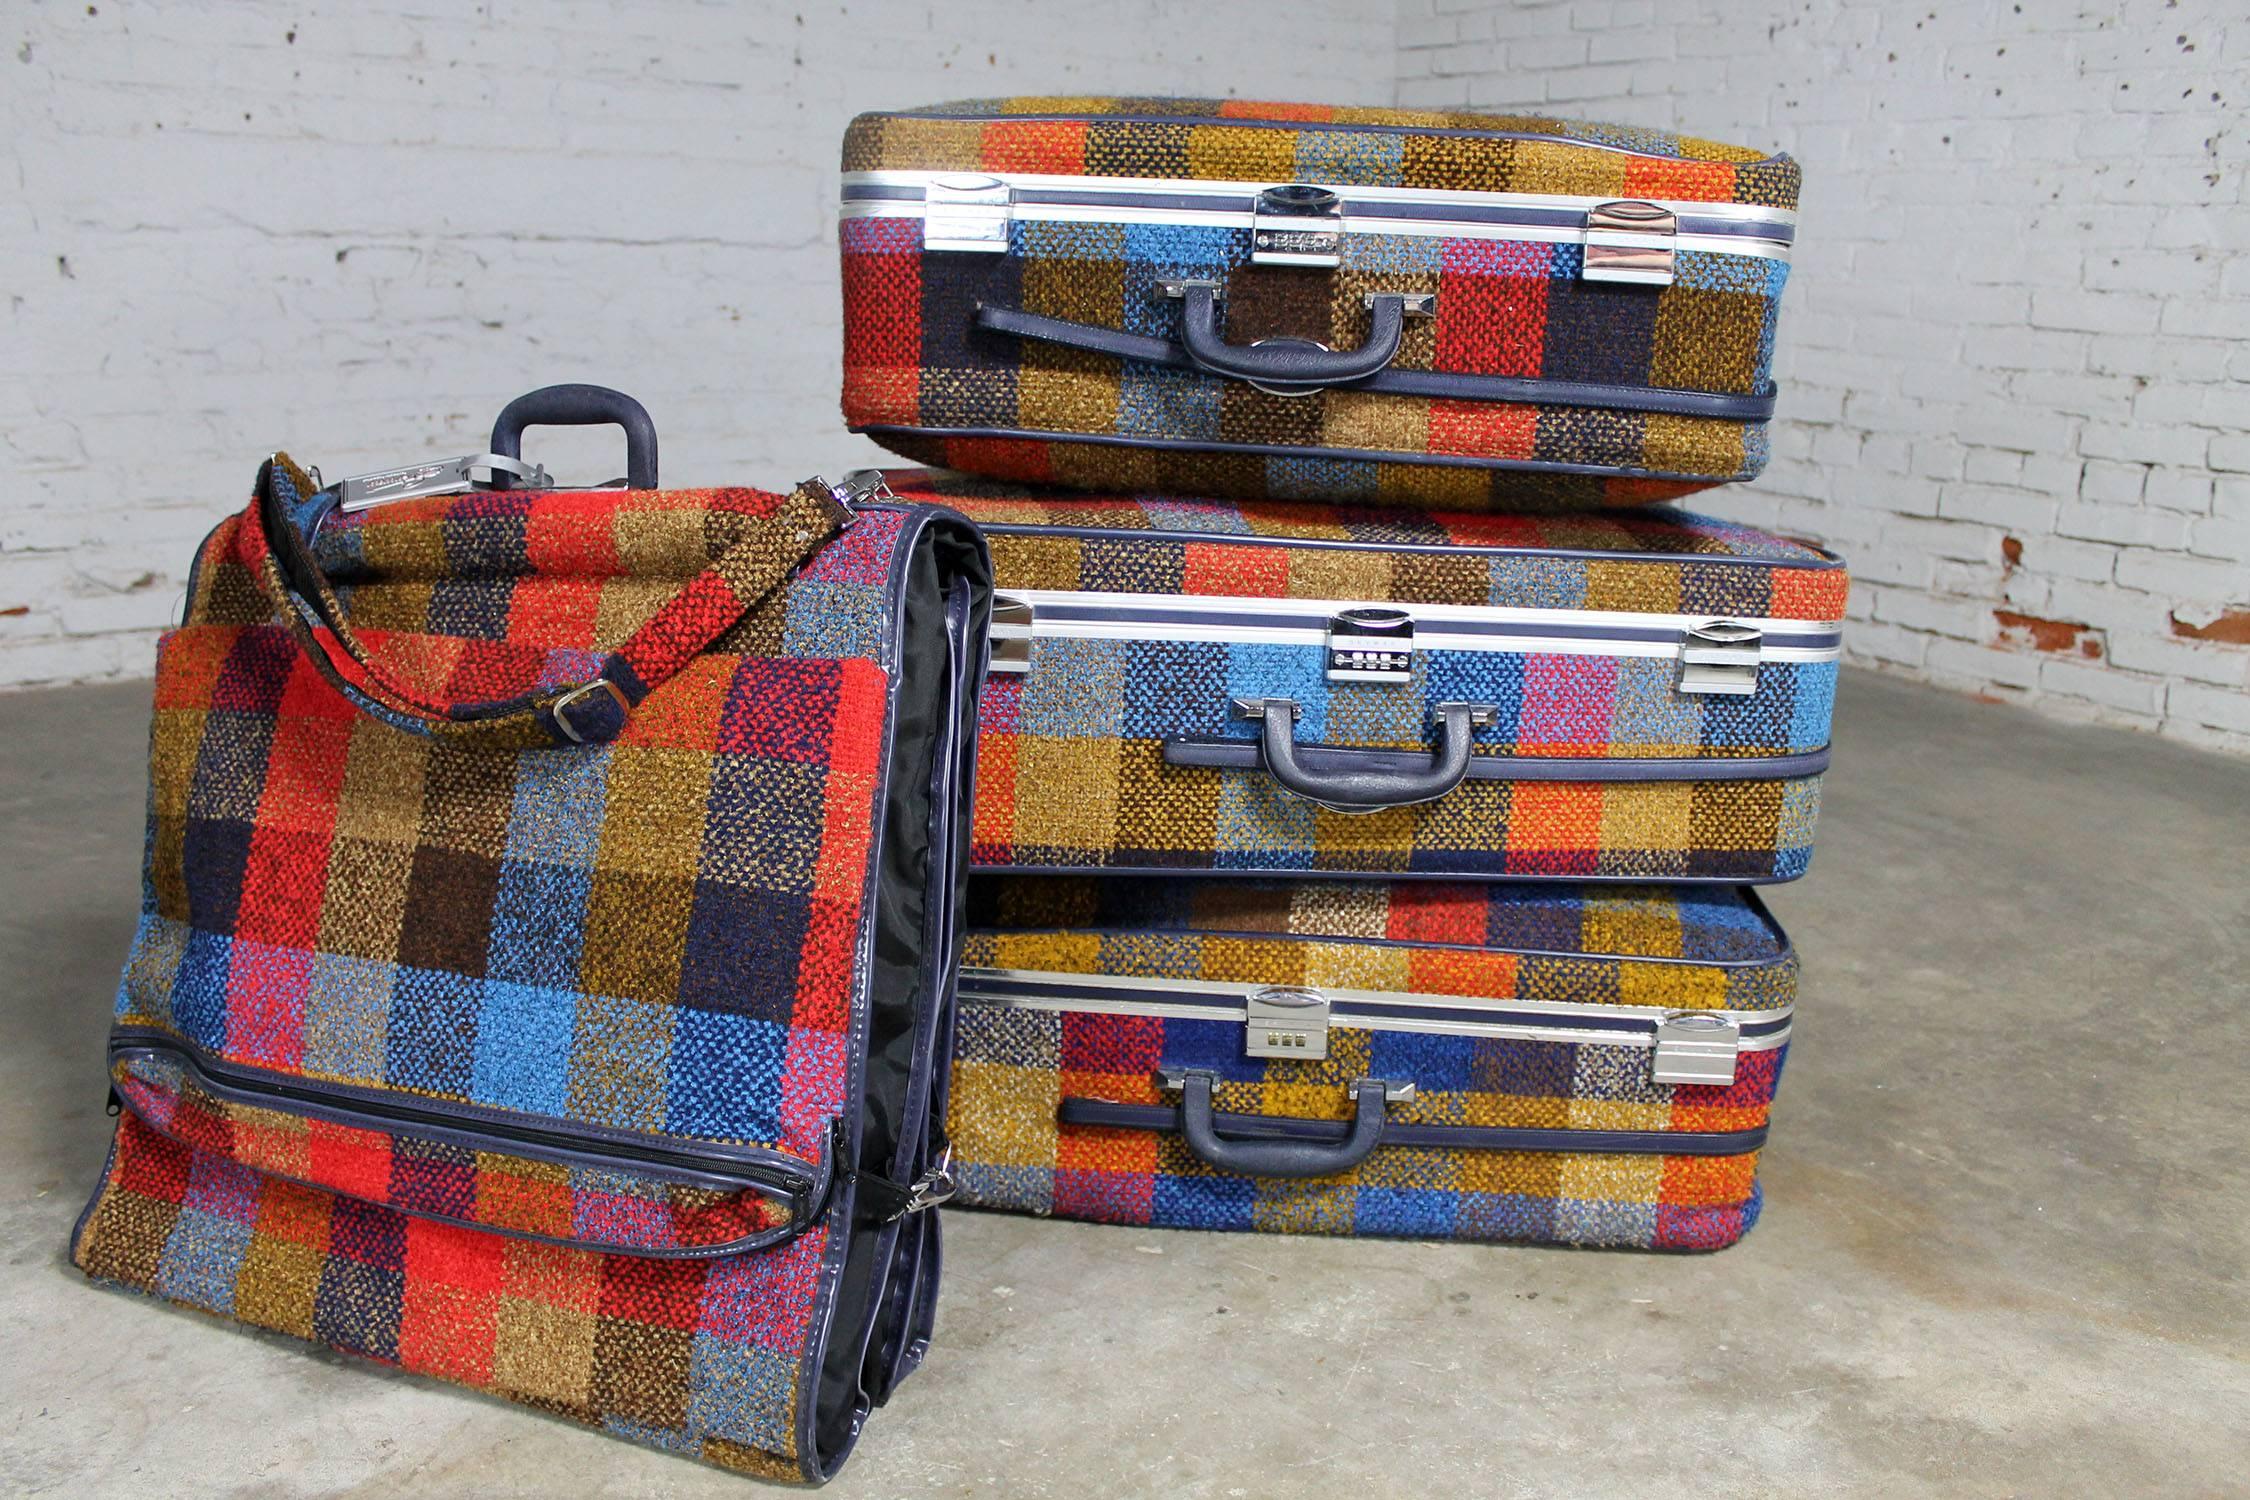 Awesome four-piece set of luggage by Skyway, circa 1970s. Mod bold and bright red, gold, and blue plaid. In incredible condition.

All my bags are packed, I’m ready go. I’m leaving on a jet plan. Oh! Hello! Aren’t these the coolest suitcases?